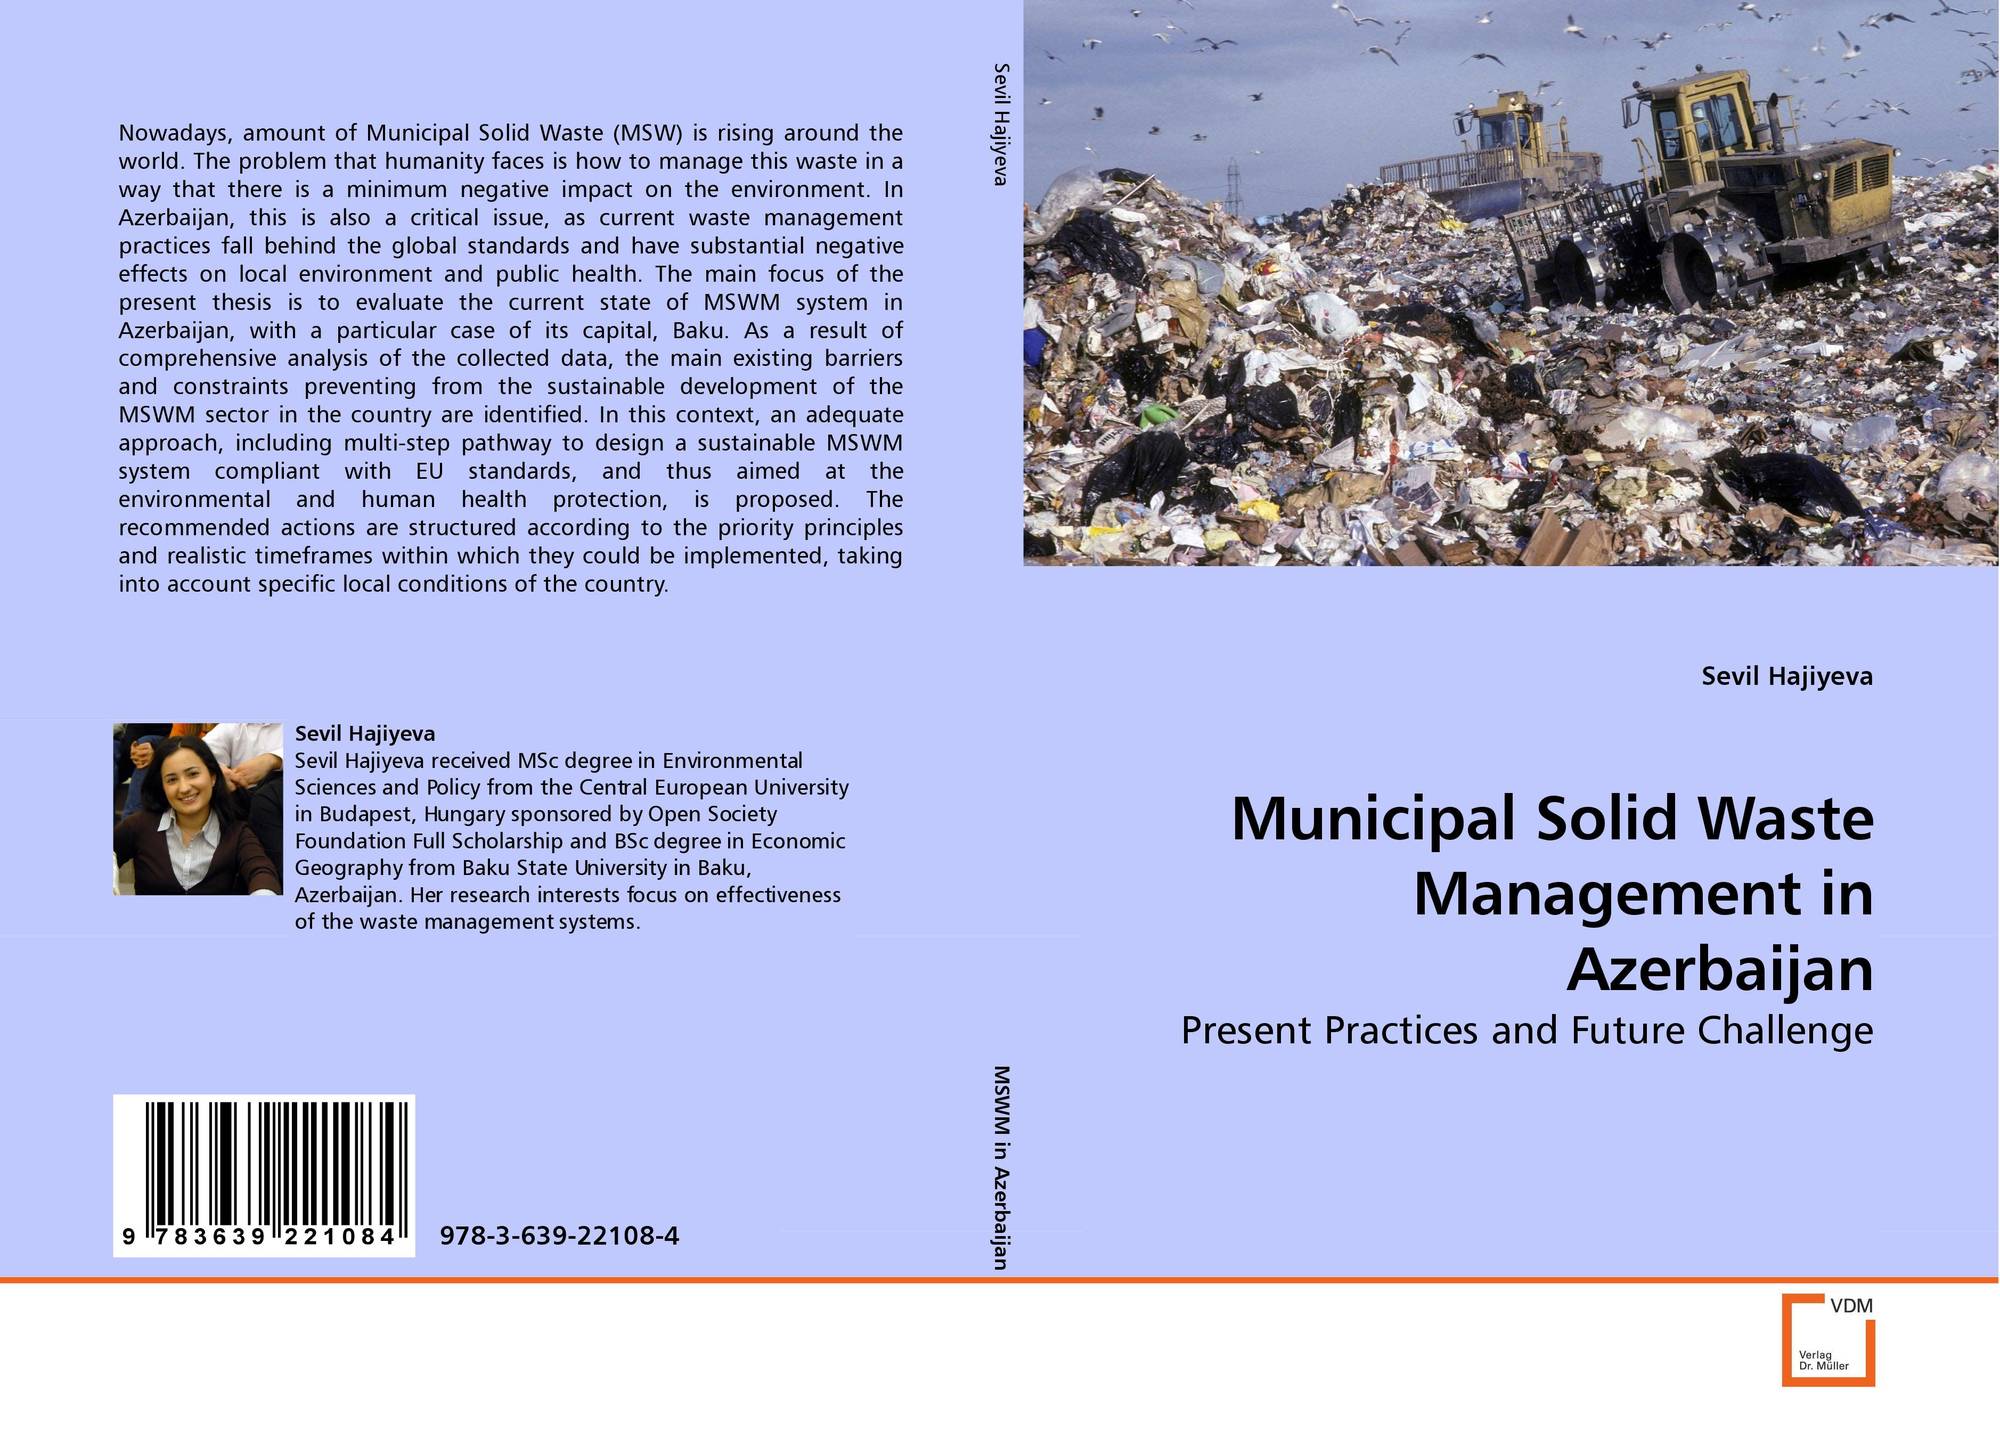 Phd thesis on municipal solid waste management